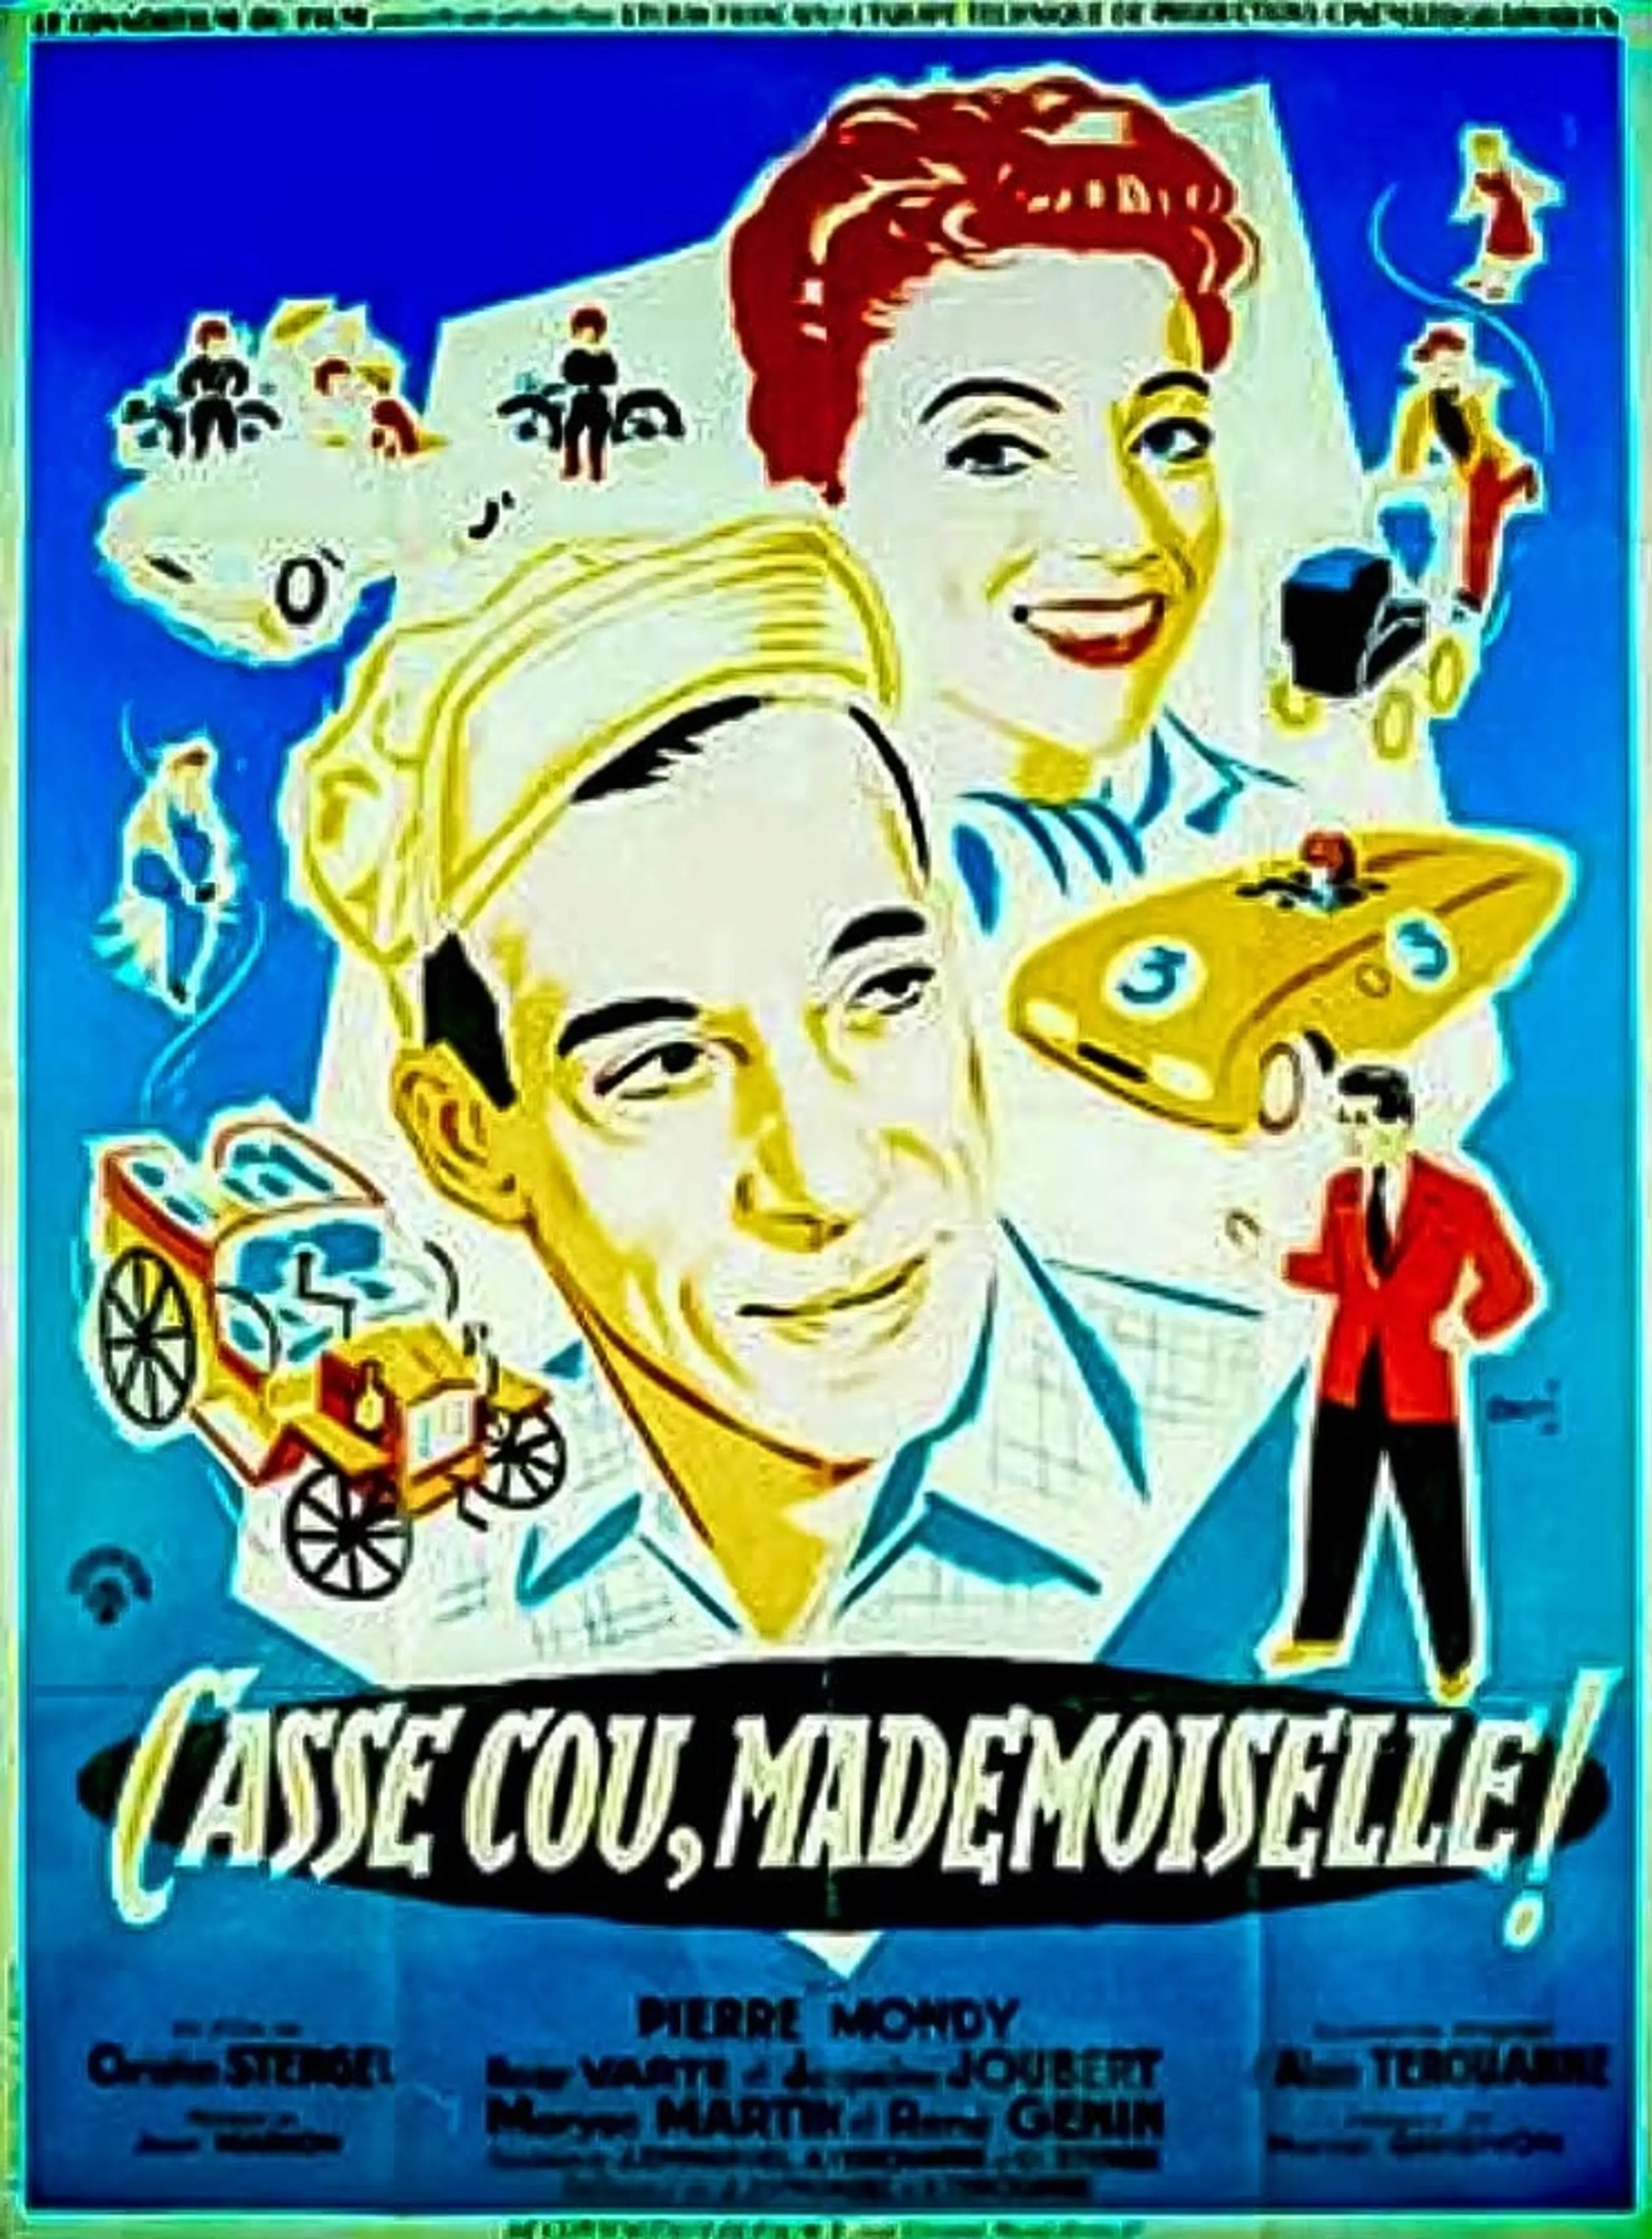 Casse-cou, mademoiselle!